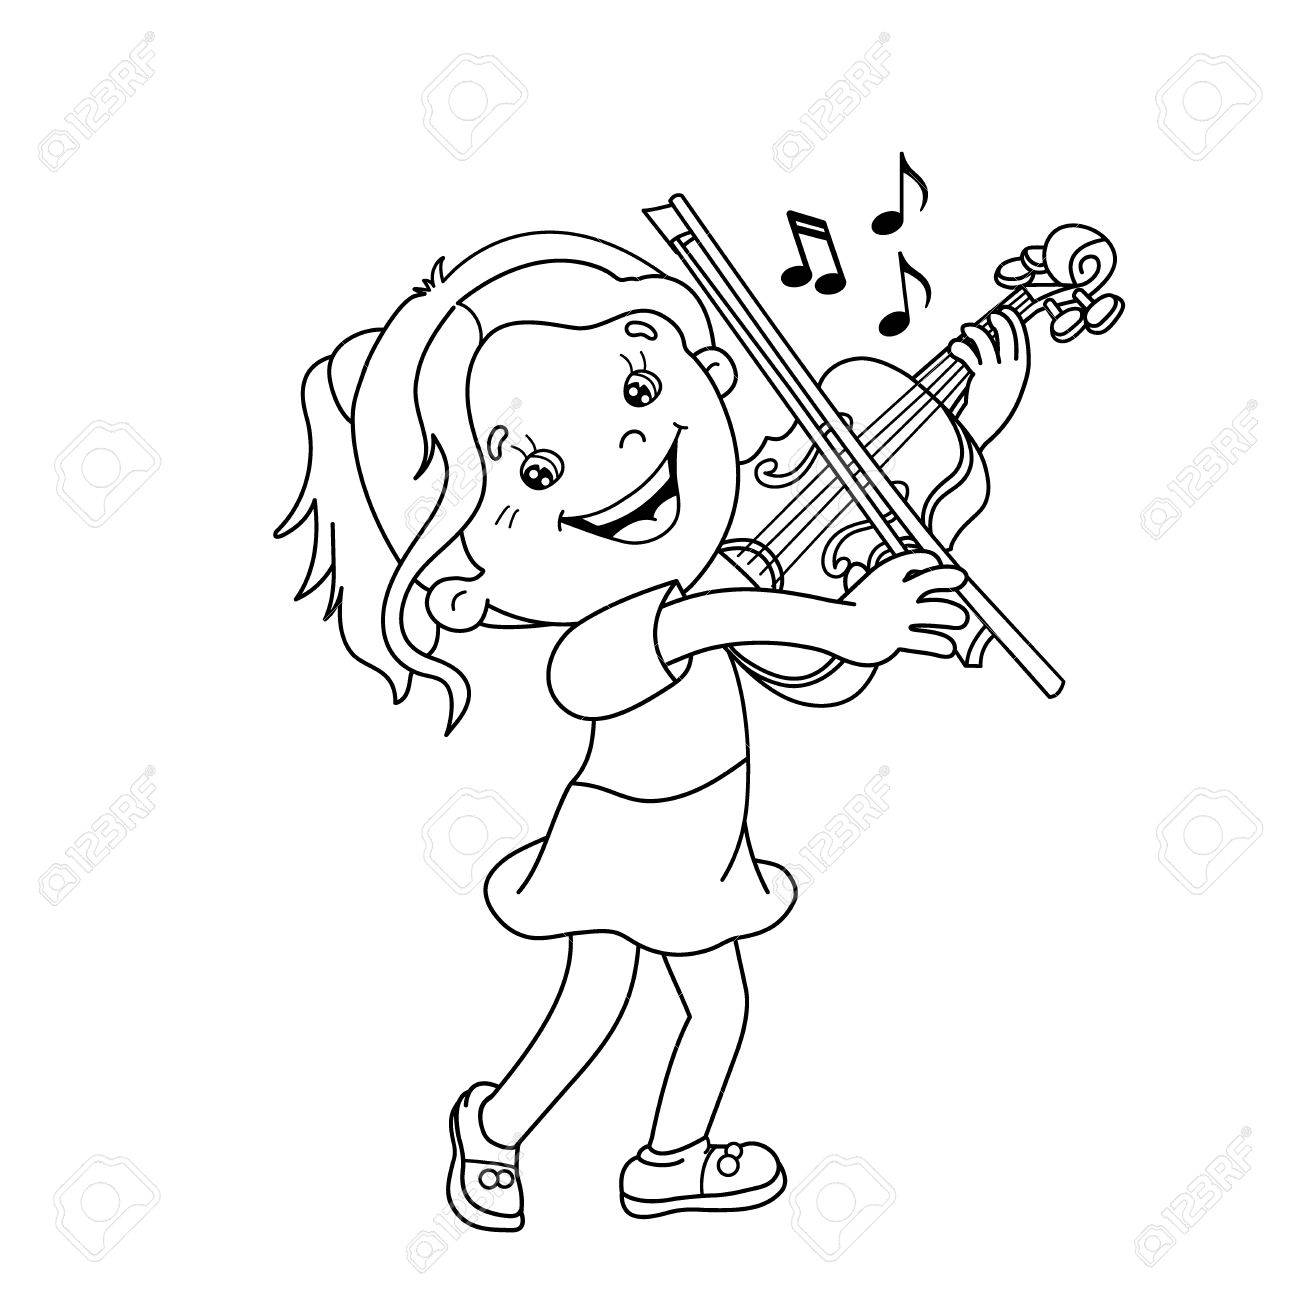 Cello Coloring Page Outline Of Cartoon Playing The Violin ...